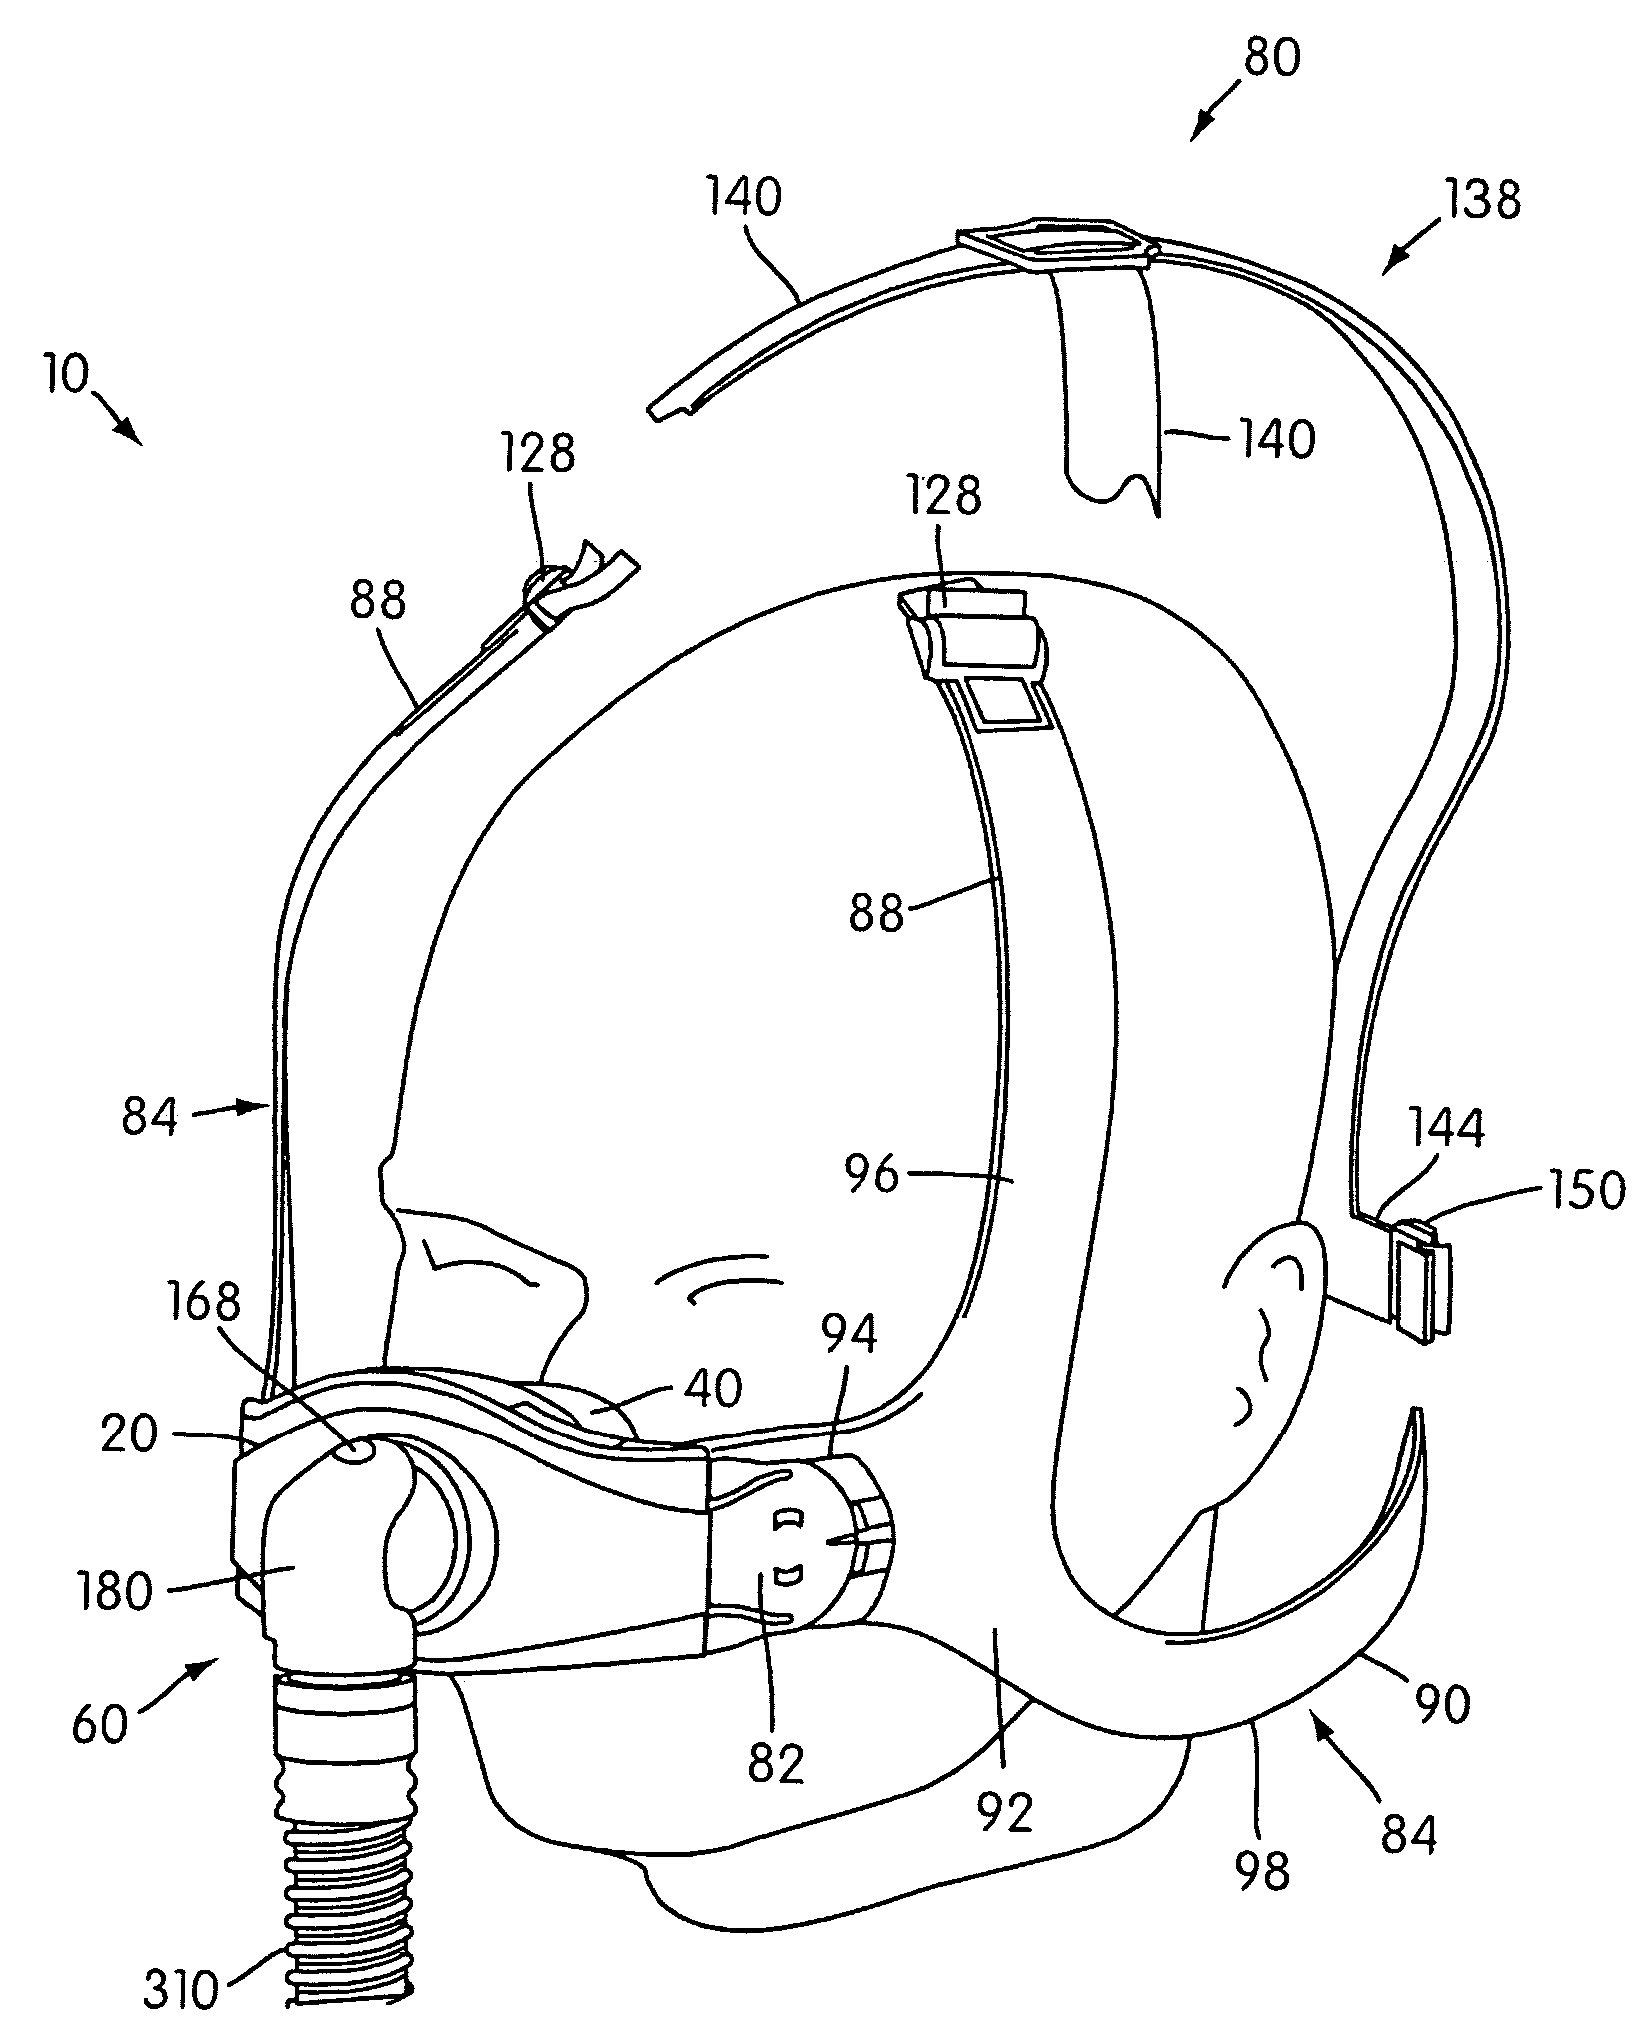 Ergonomic and adjustable respiratory mask assembly with headgear assembly